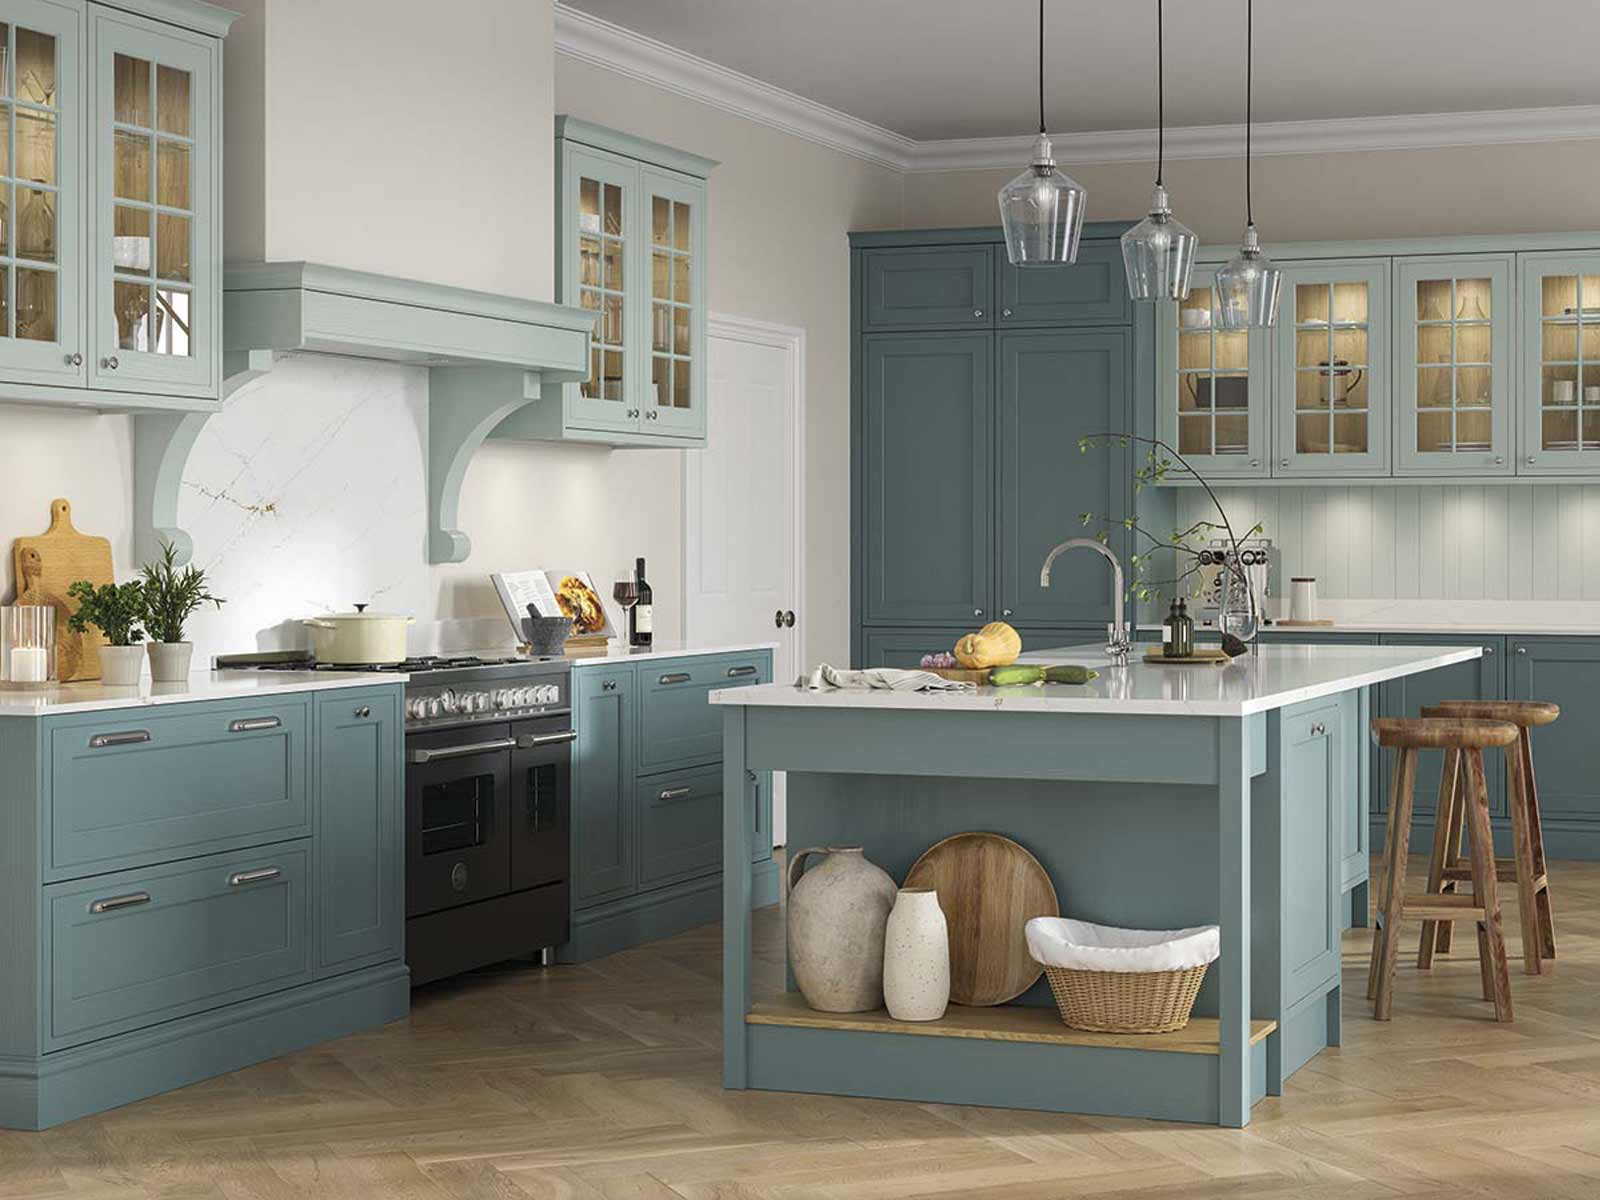 A turquoise and grey kitchen characterised by bold kitchen unit colours